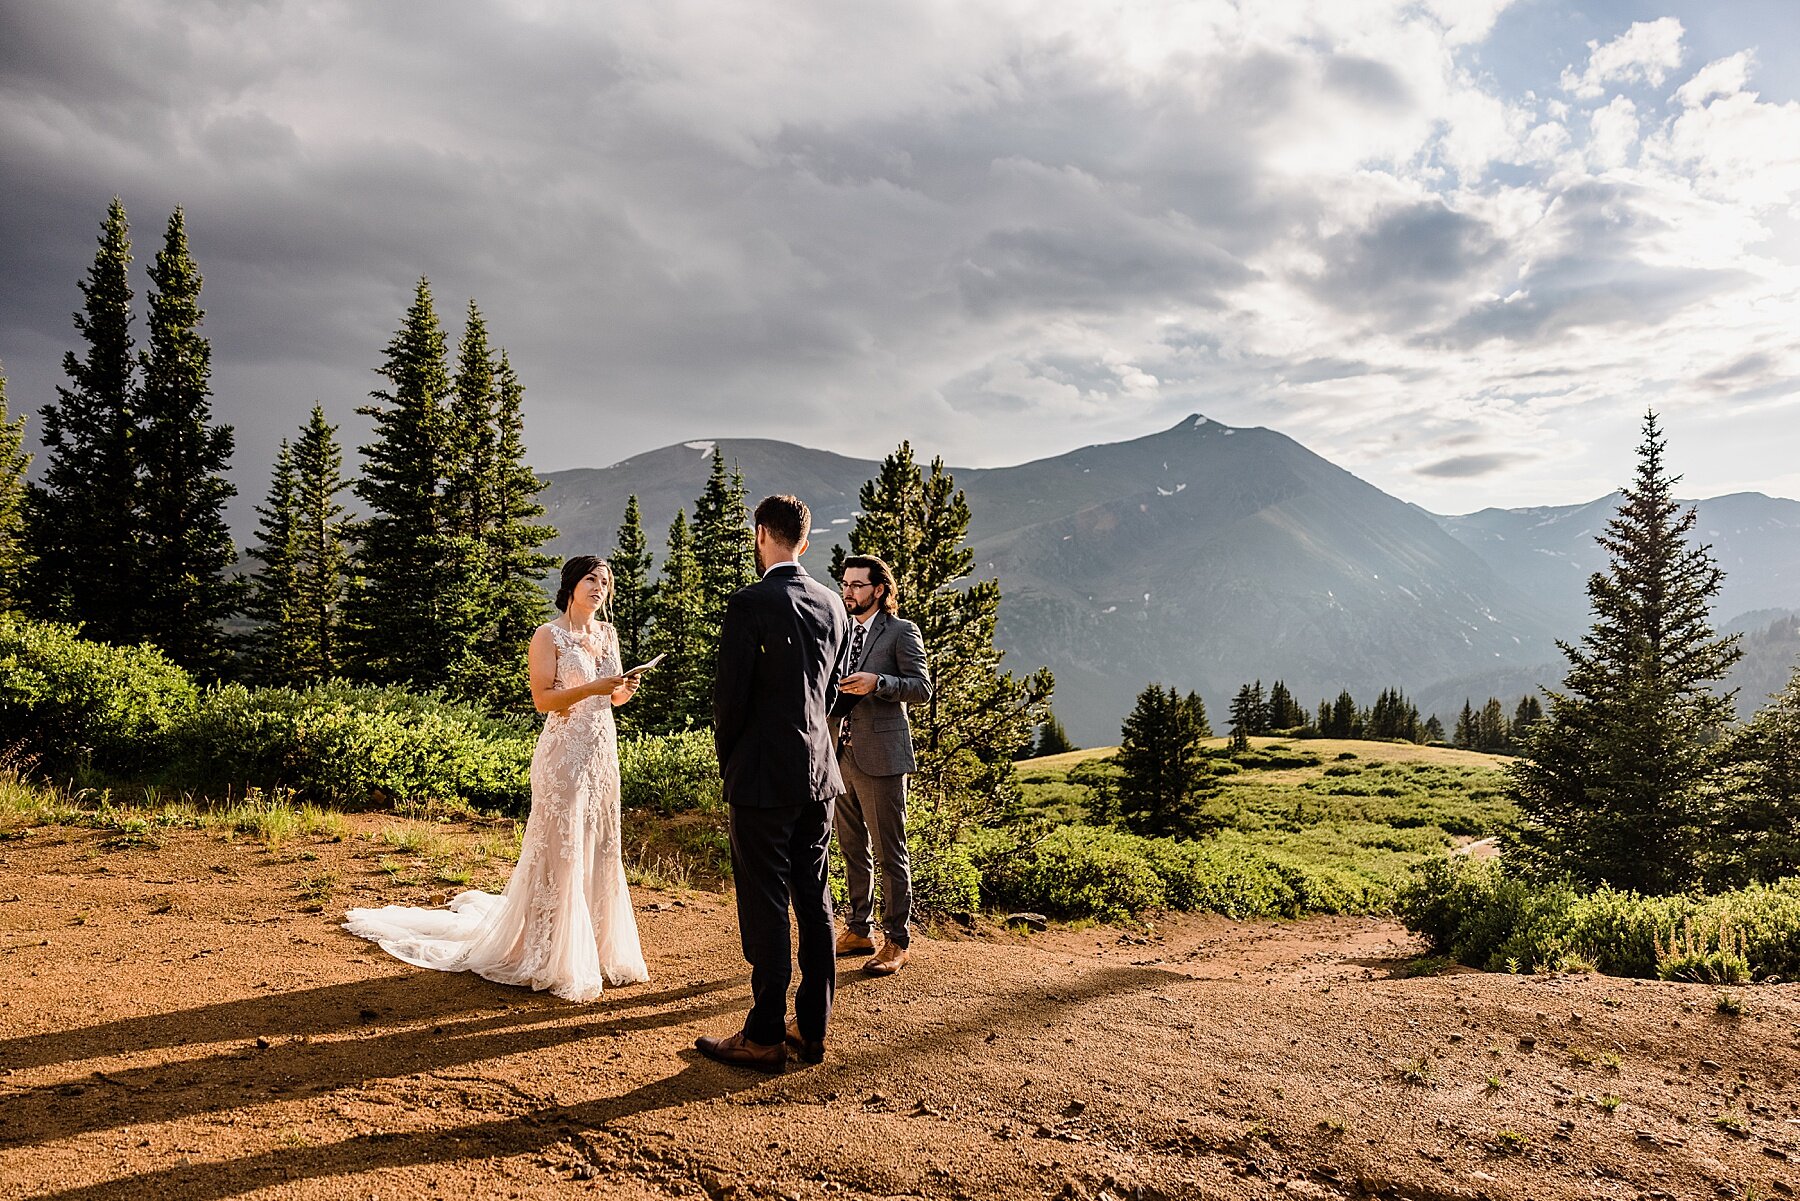 Rainy Mountaintop Elopement in Colorado - Vow of the Wild